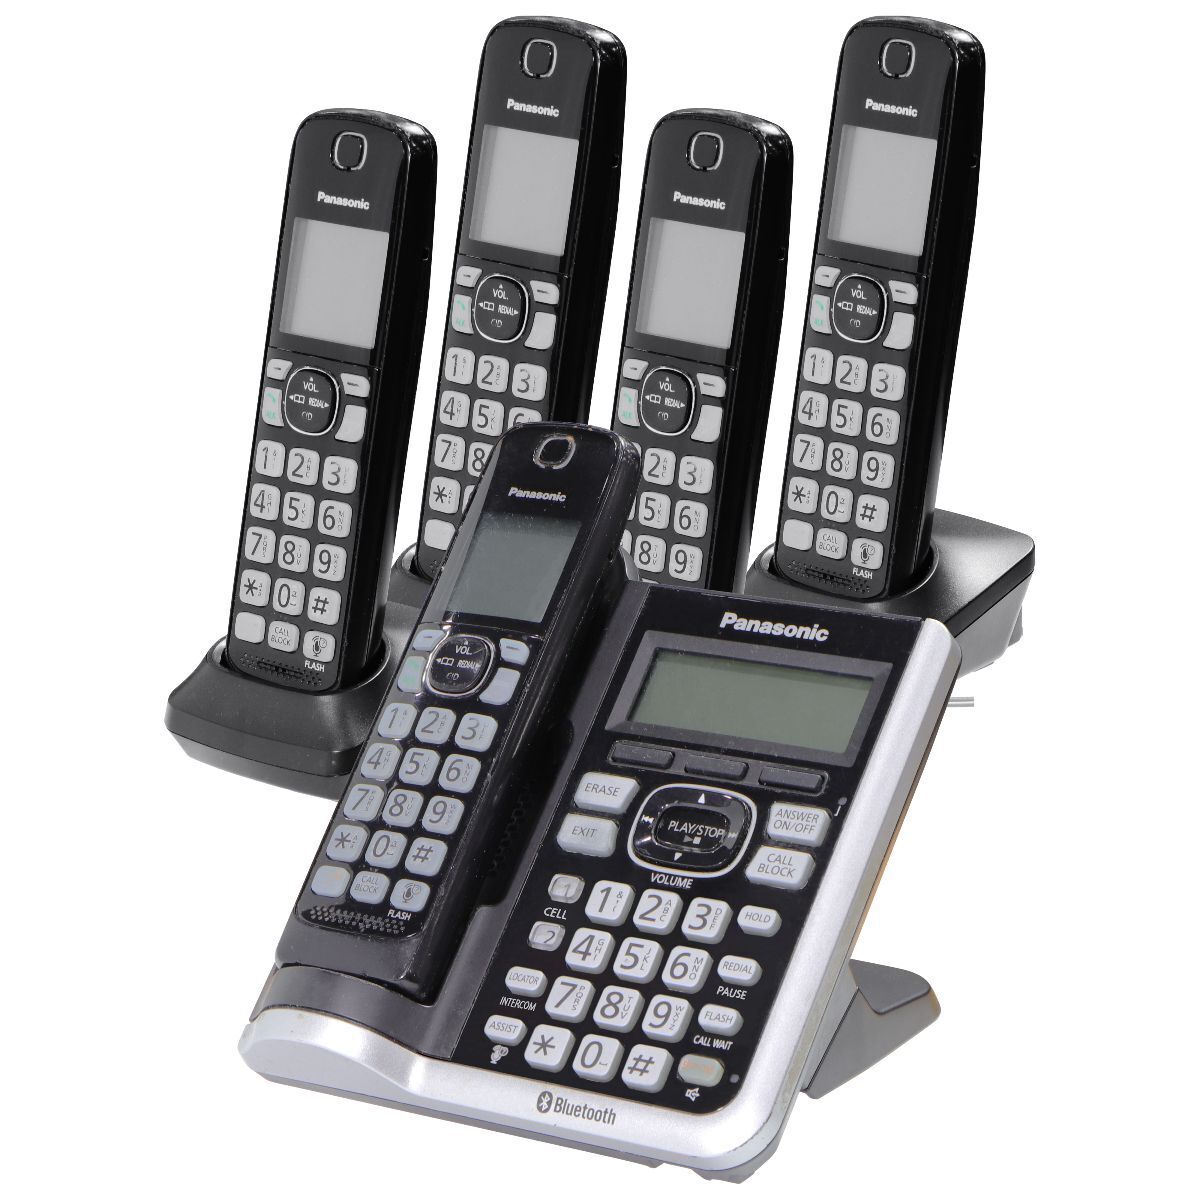 Panasonic KX-TG785SK Dect 6.0 Link2Cell Phone System w/ 5 KX-TGFA51 Handsets